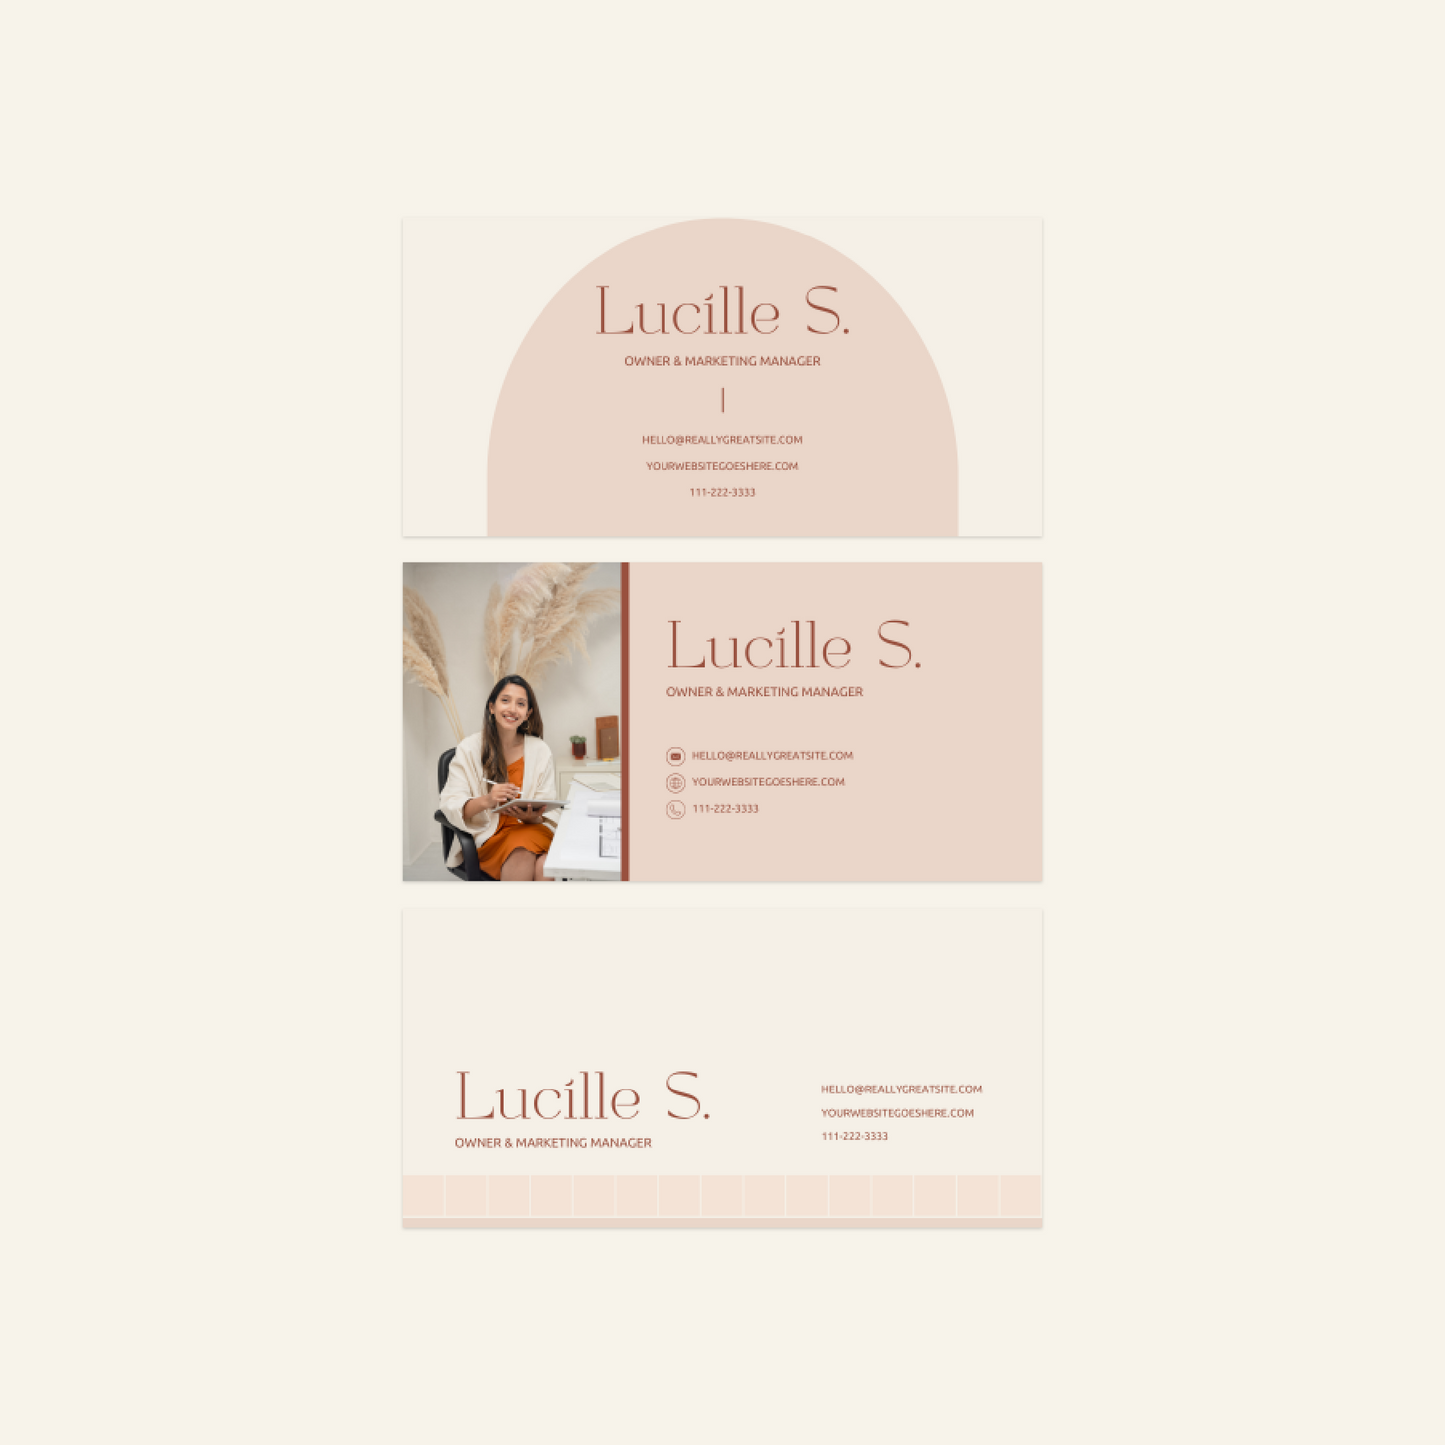 Lucille - Email Signature Template